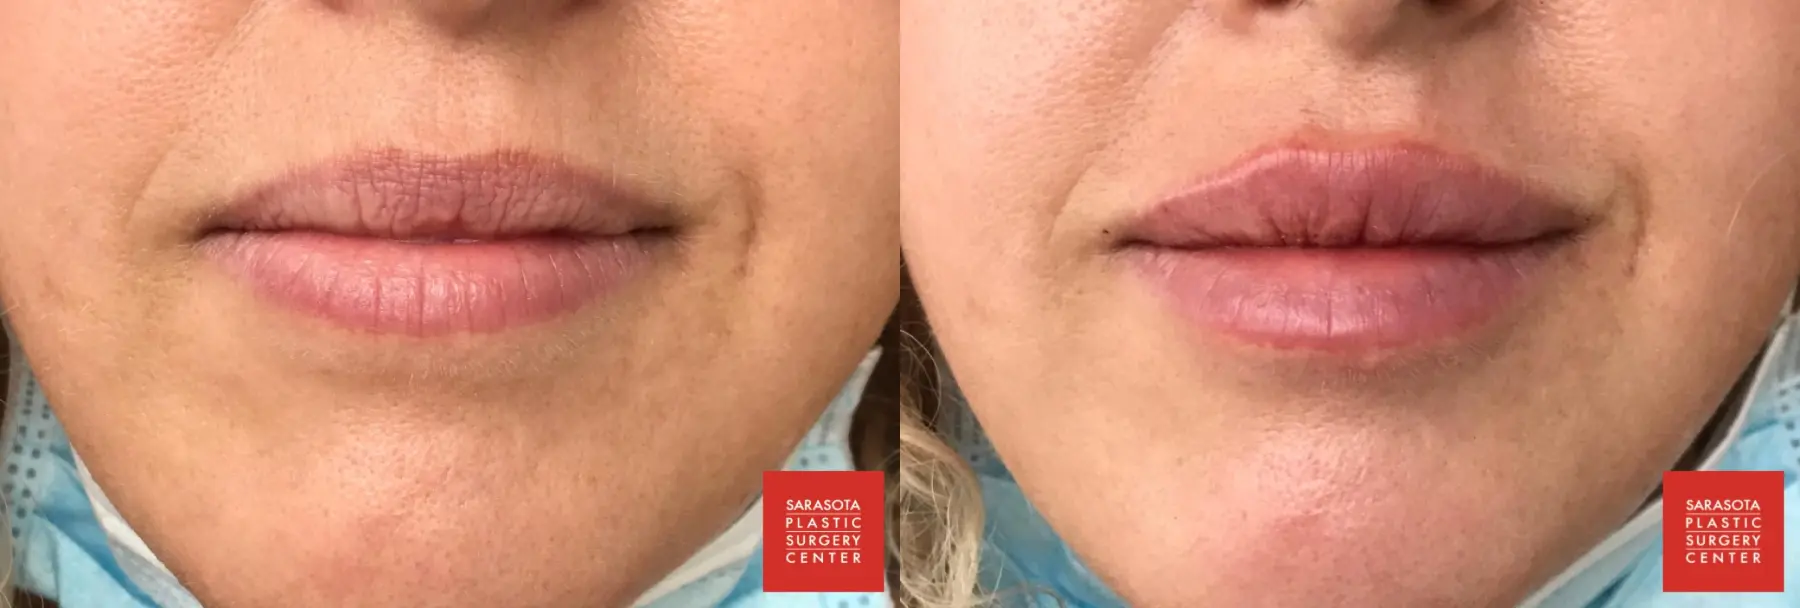 Injectables - Face: Patient 5 - Before and After  